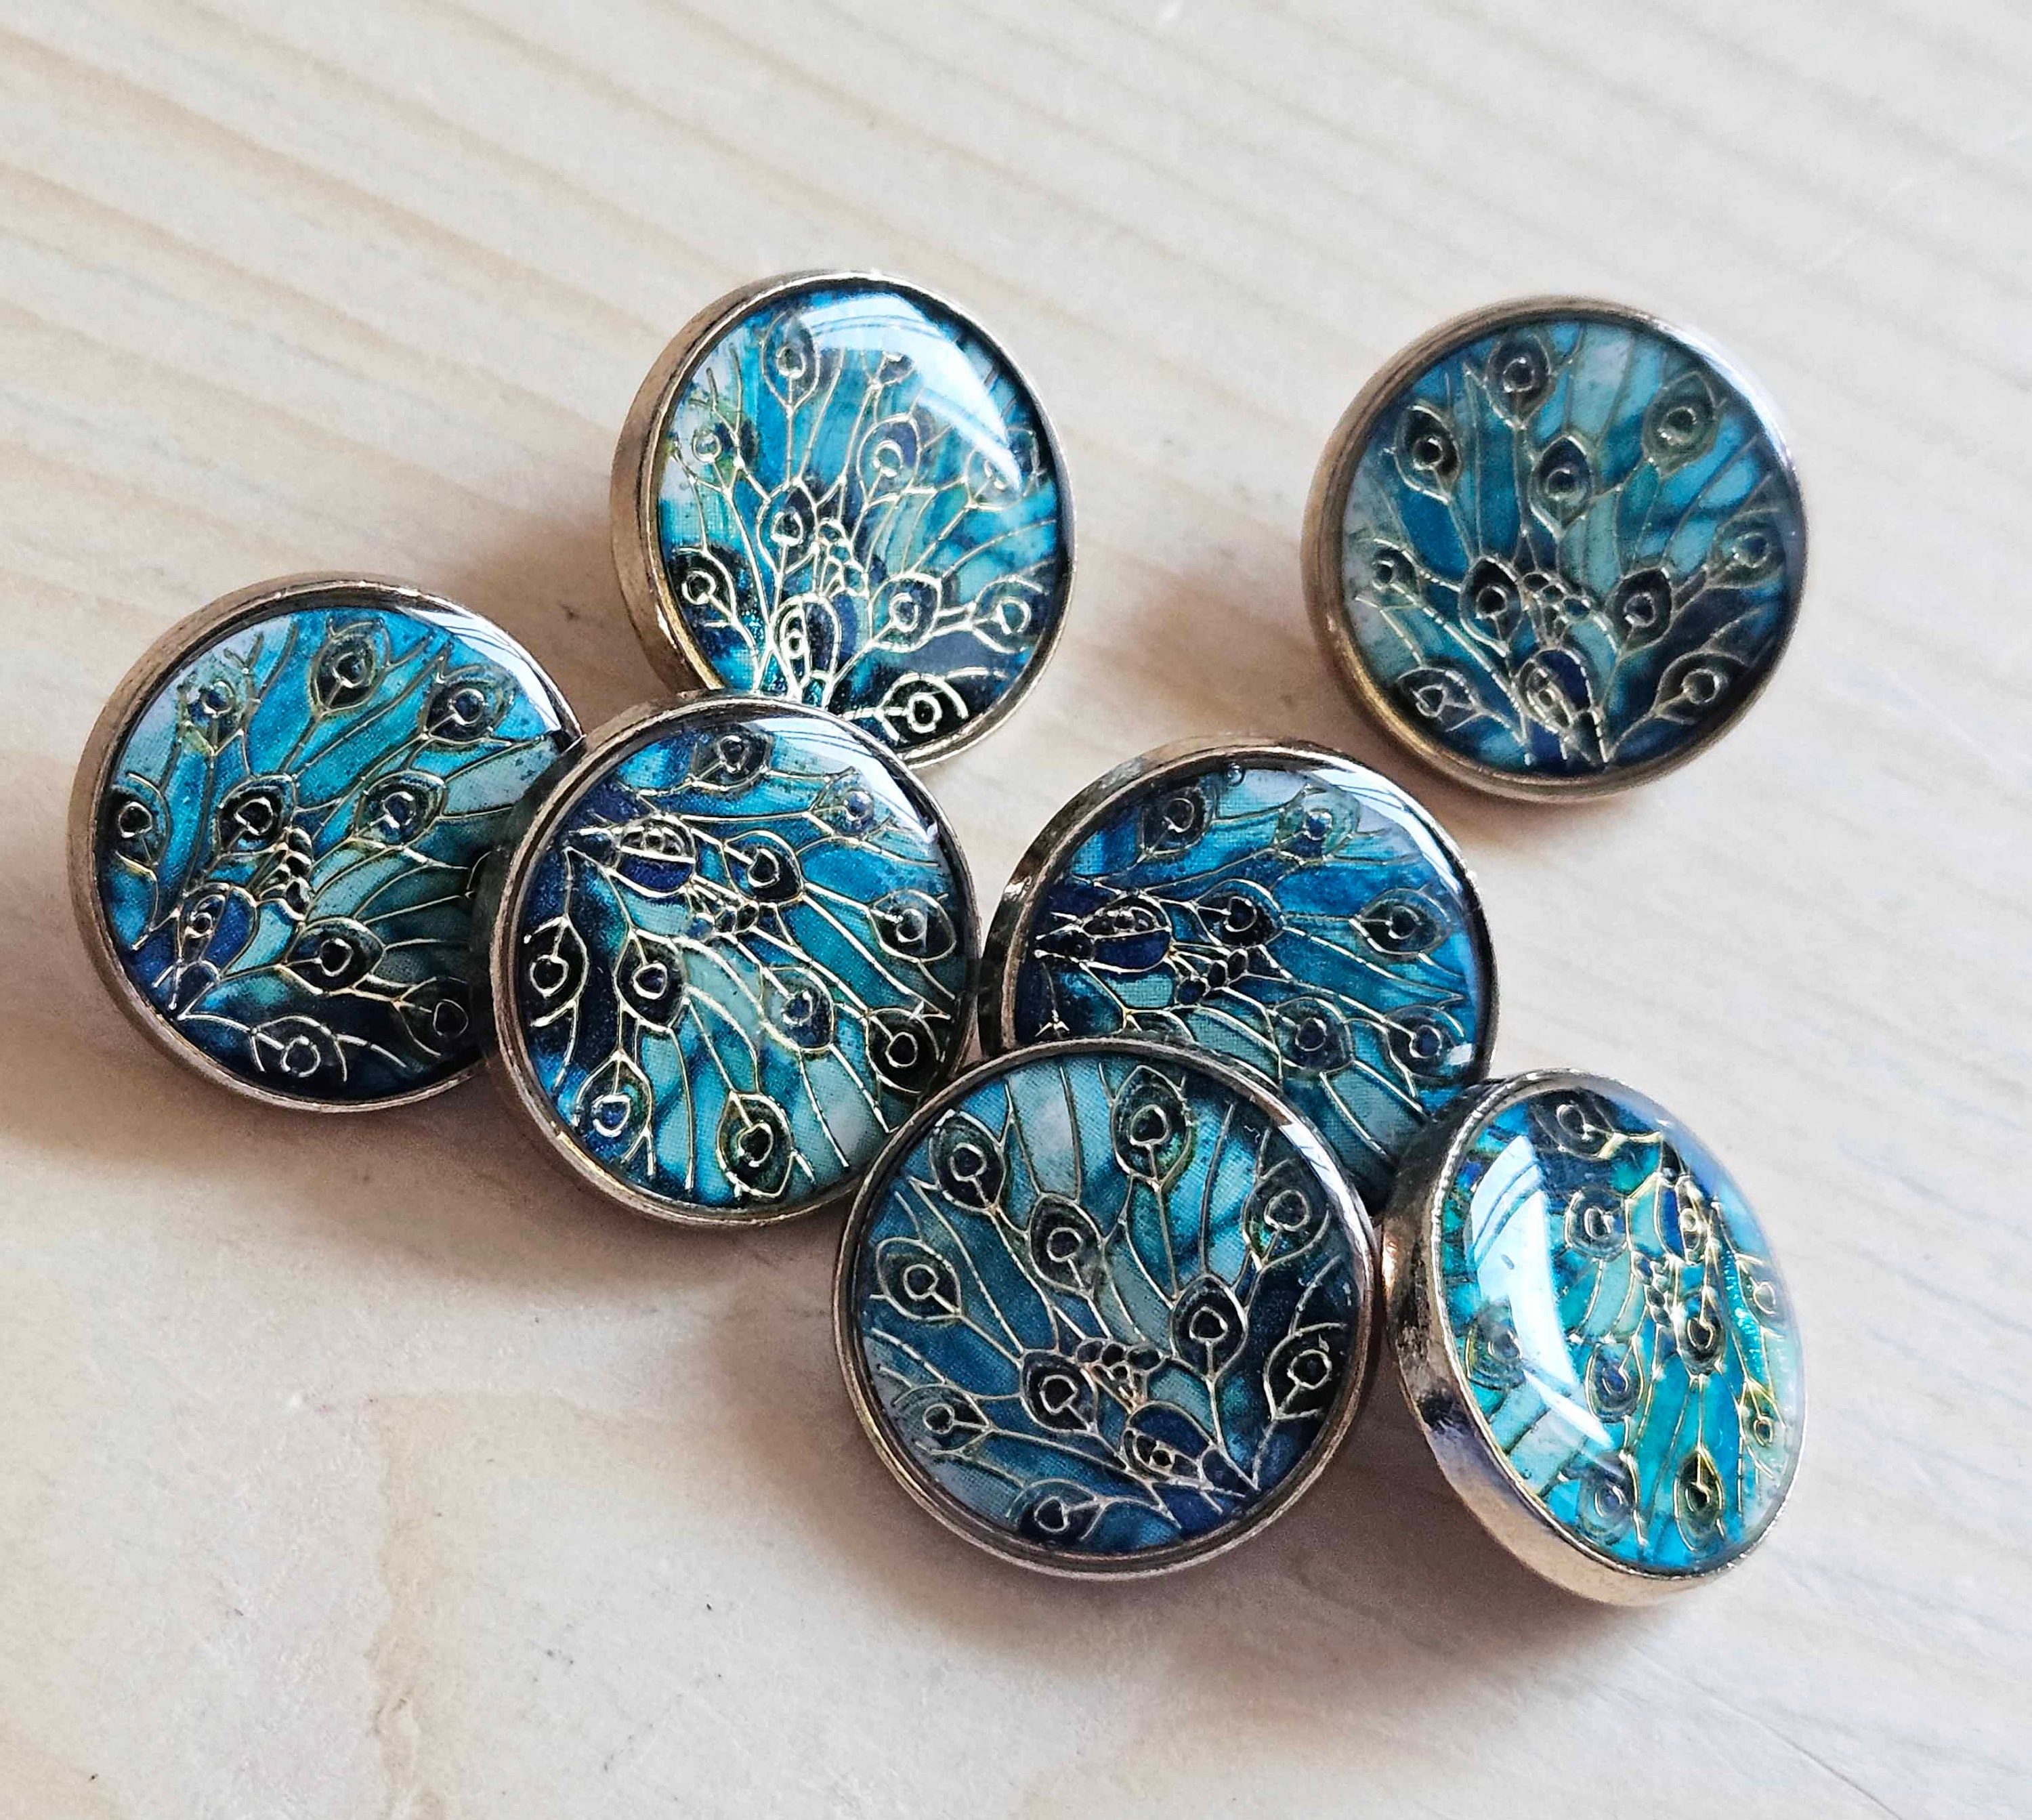 10 Blazer Buttons, Gold, Silver, Plain, Crest, Mother of Pearl MOP, Wood,  Metal, Domed, Flat, High Quality, Suit Set of 11 Buttons 